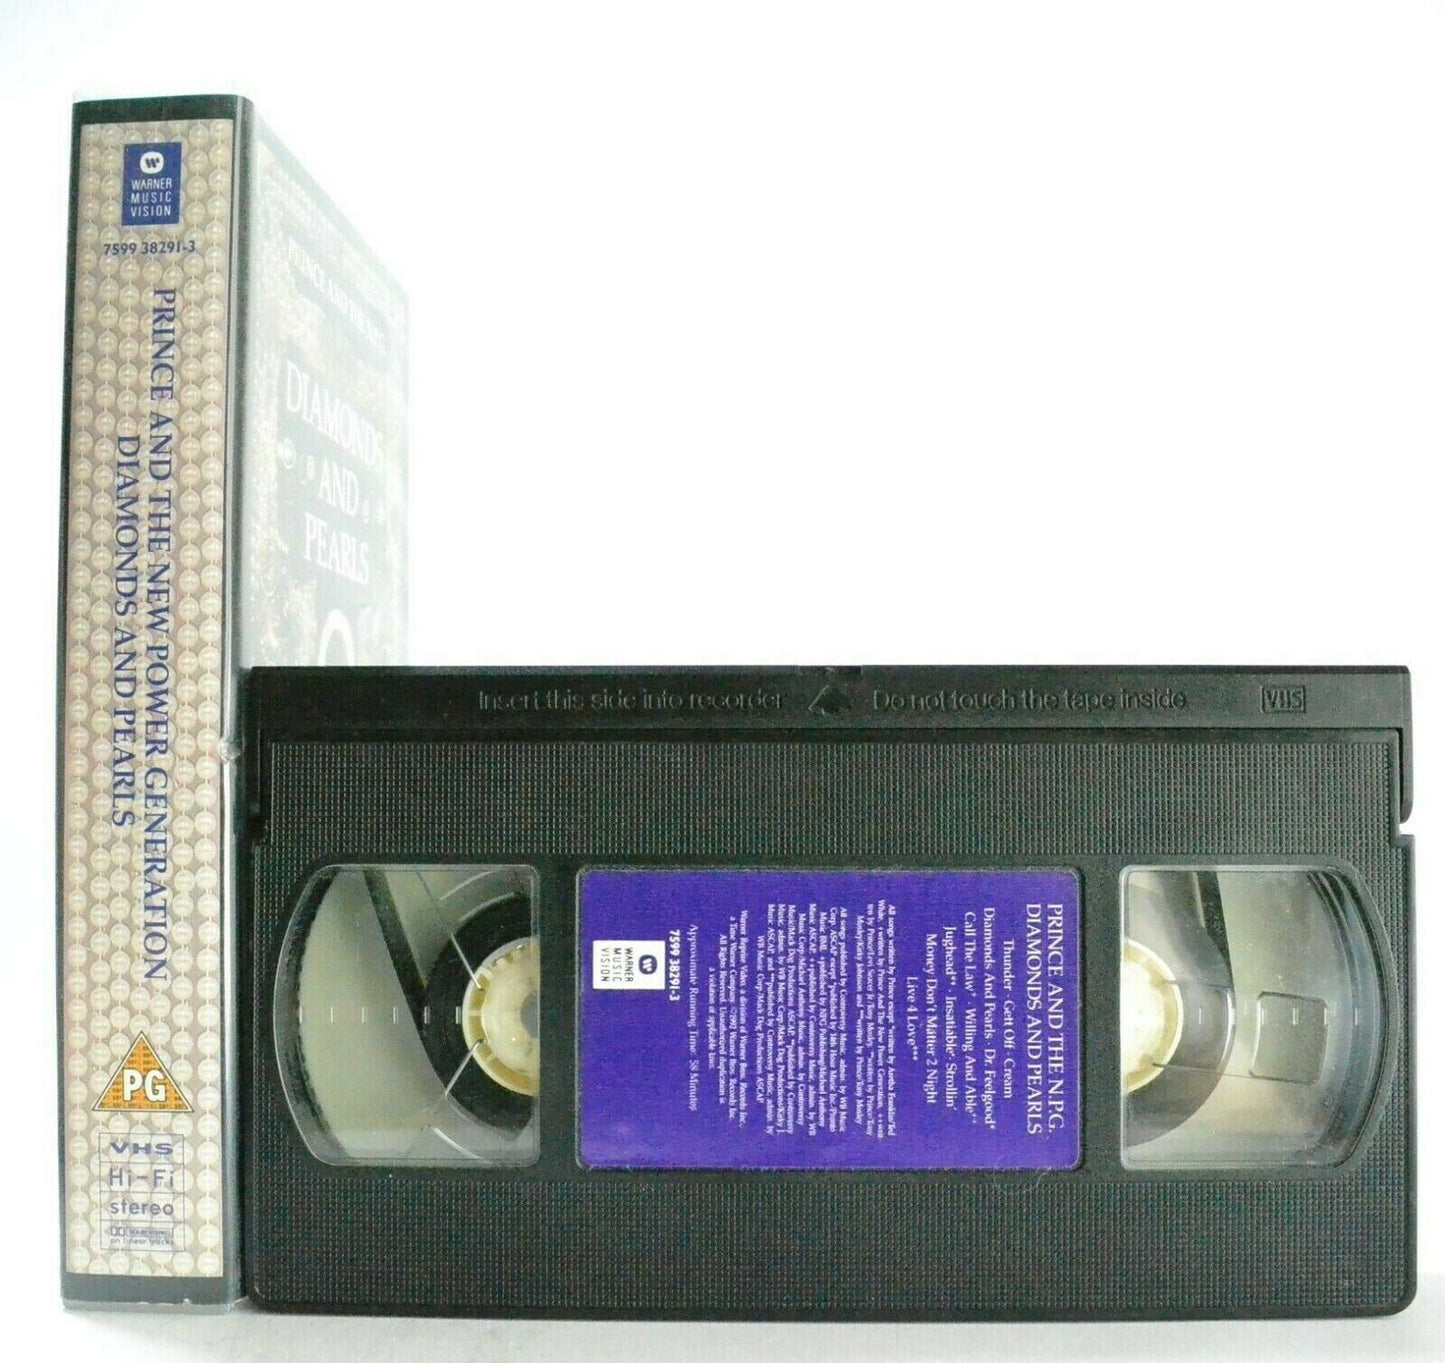 Prince And The N.P.G.: Diamond And Pearls - Video Collection - Music - Pal VHS-